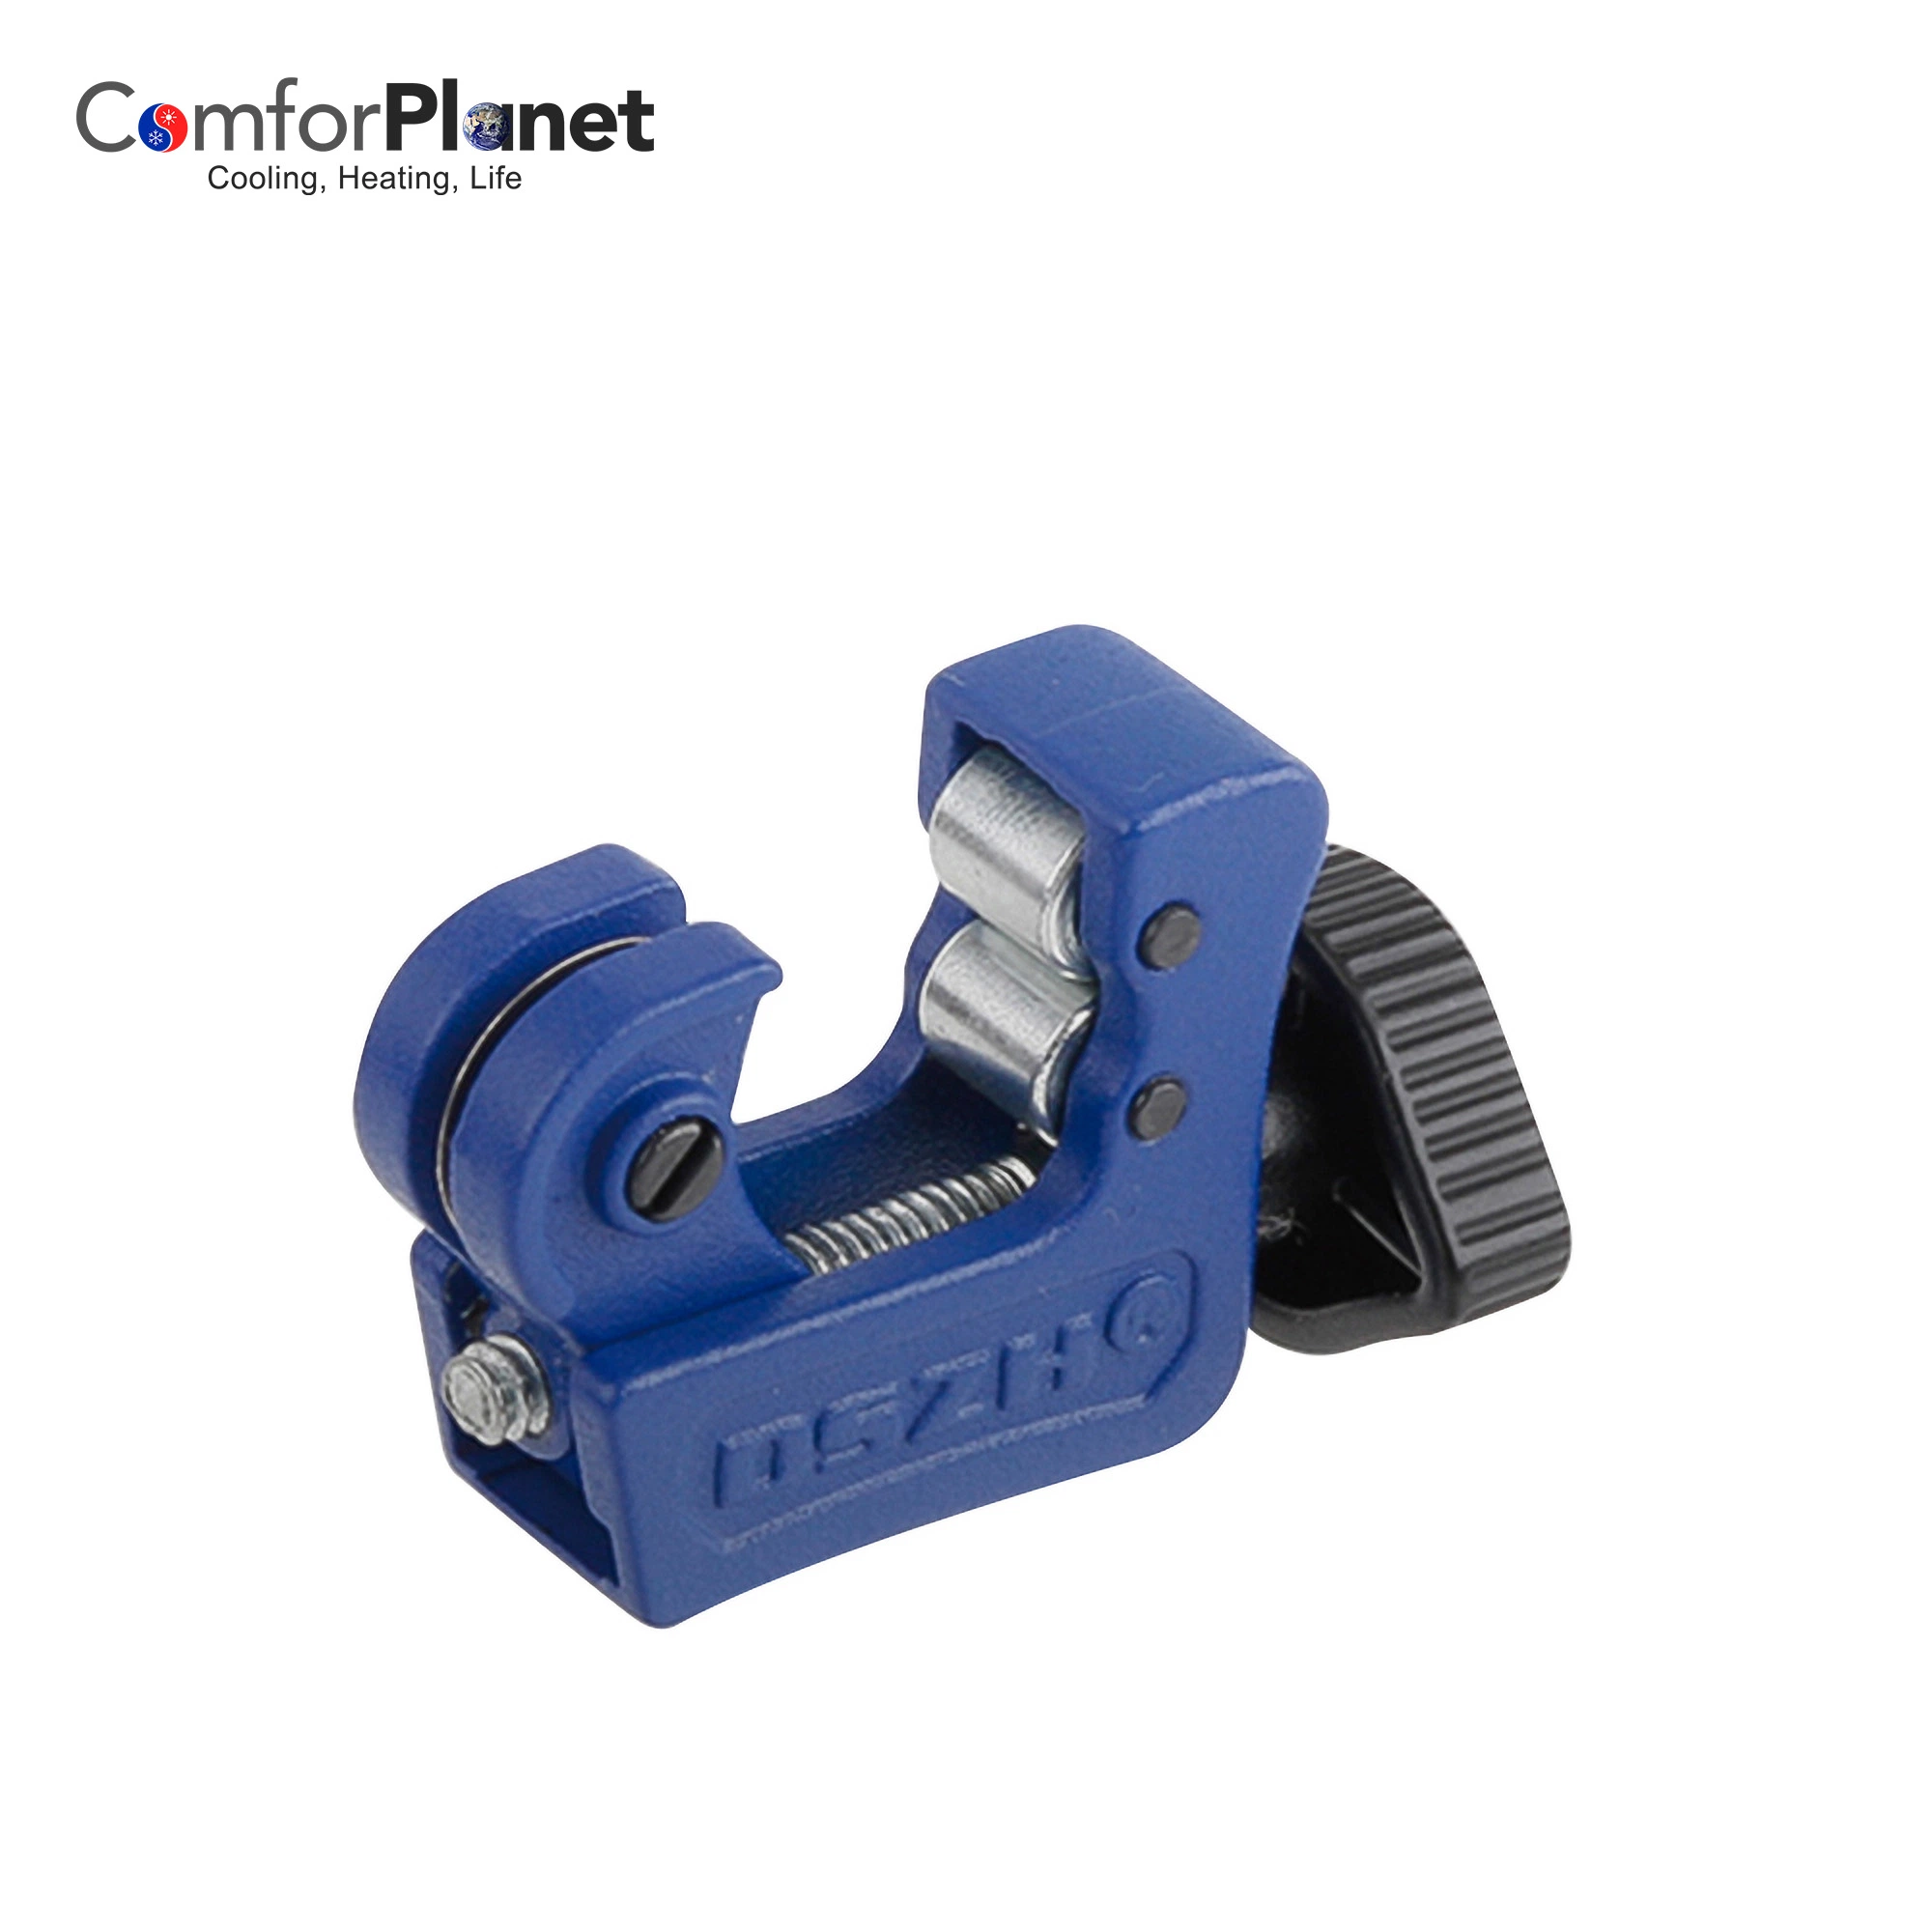 Factory Refrigeration Parts Hand Tools Copper Pipe Cutter Tube Cutter for Air Conditioner